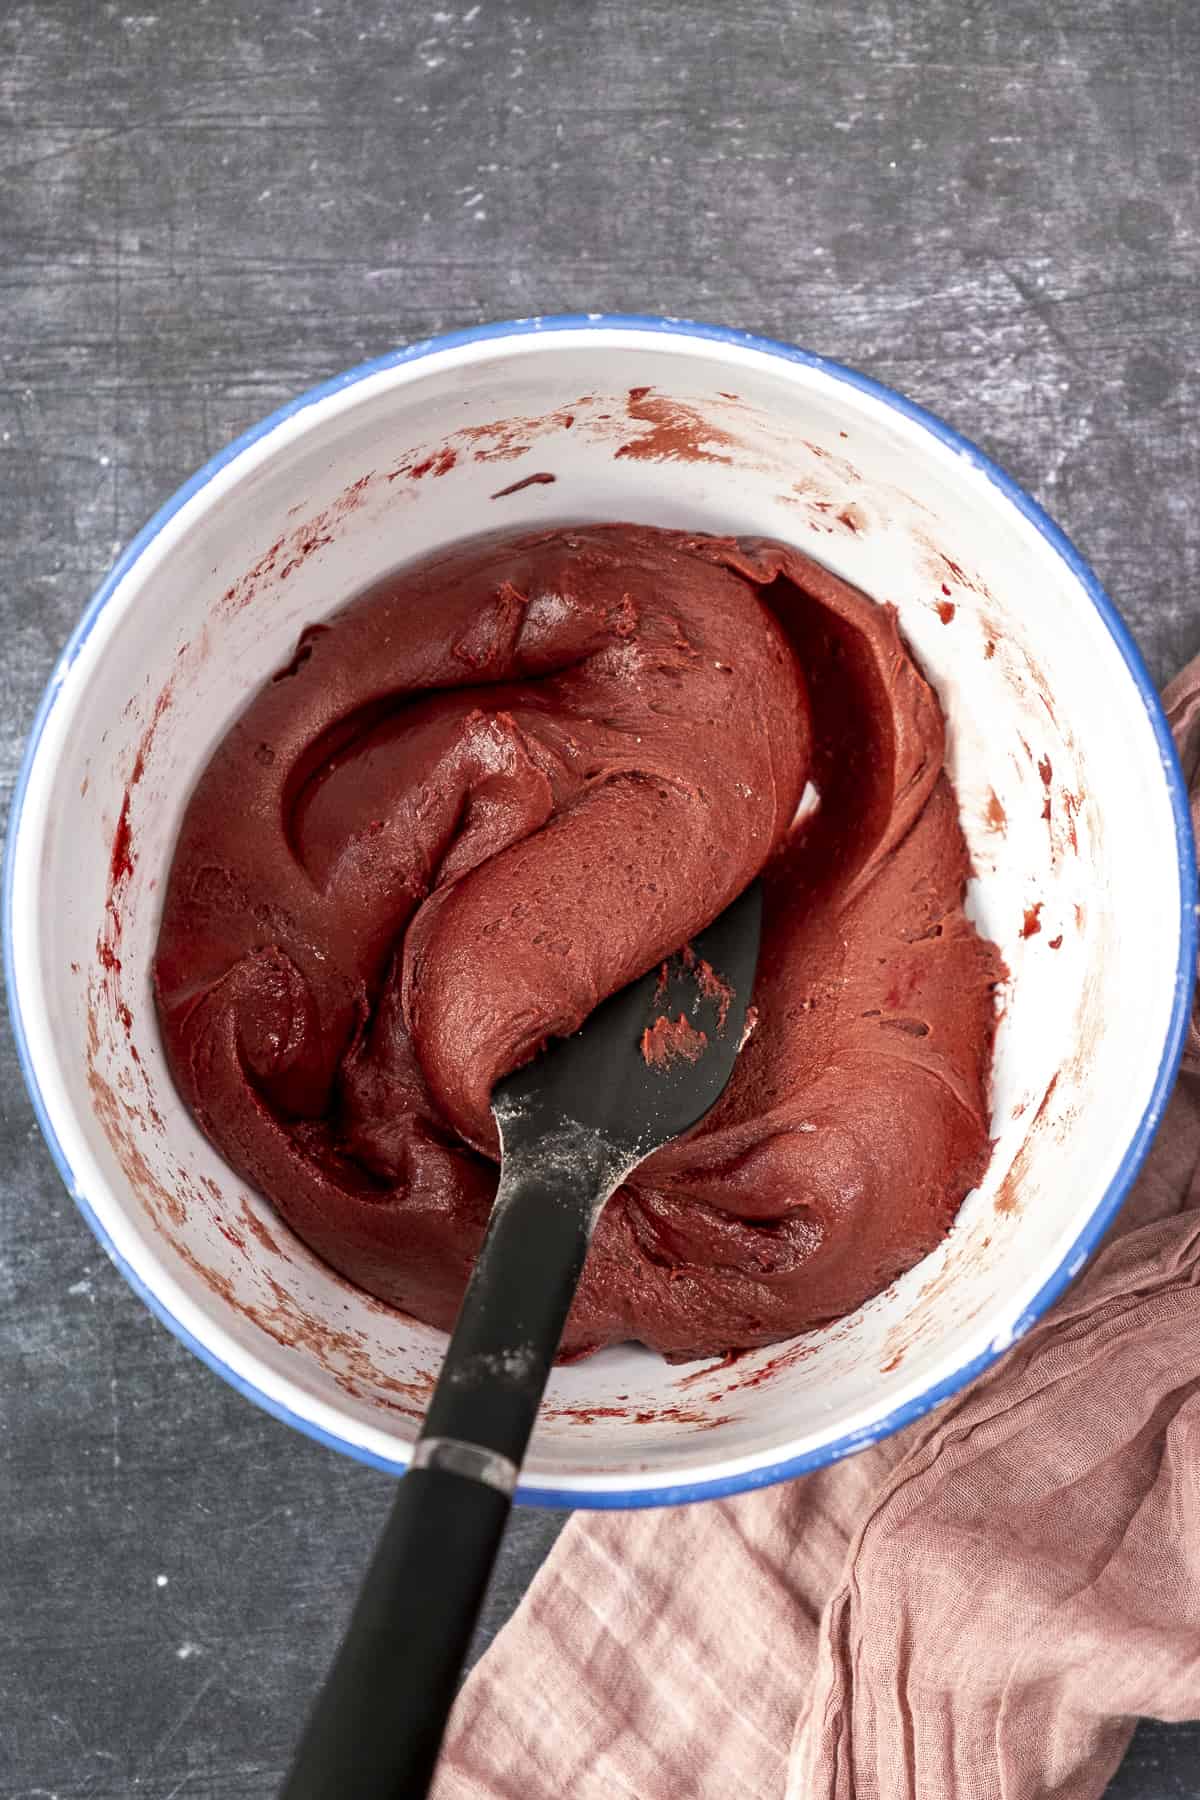 Red velvet cookie dough in a white bowl and a black spatula inside it.